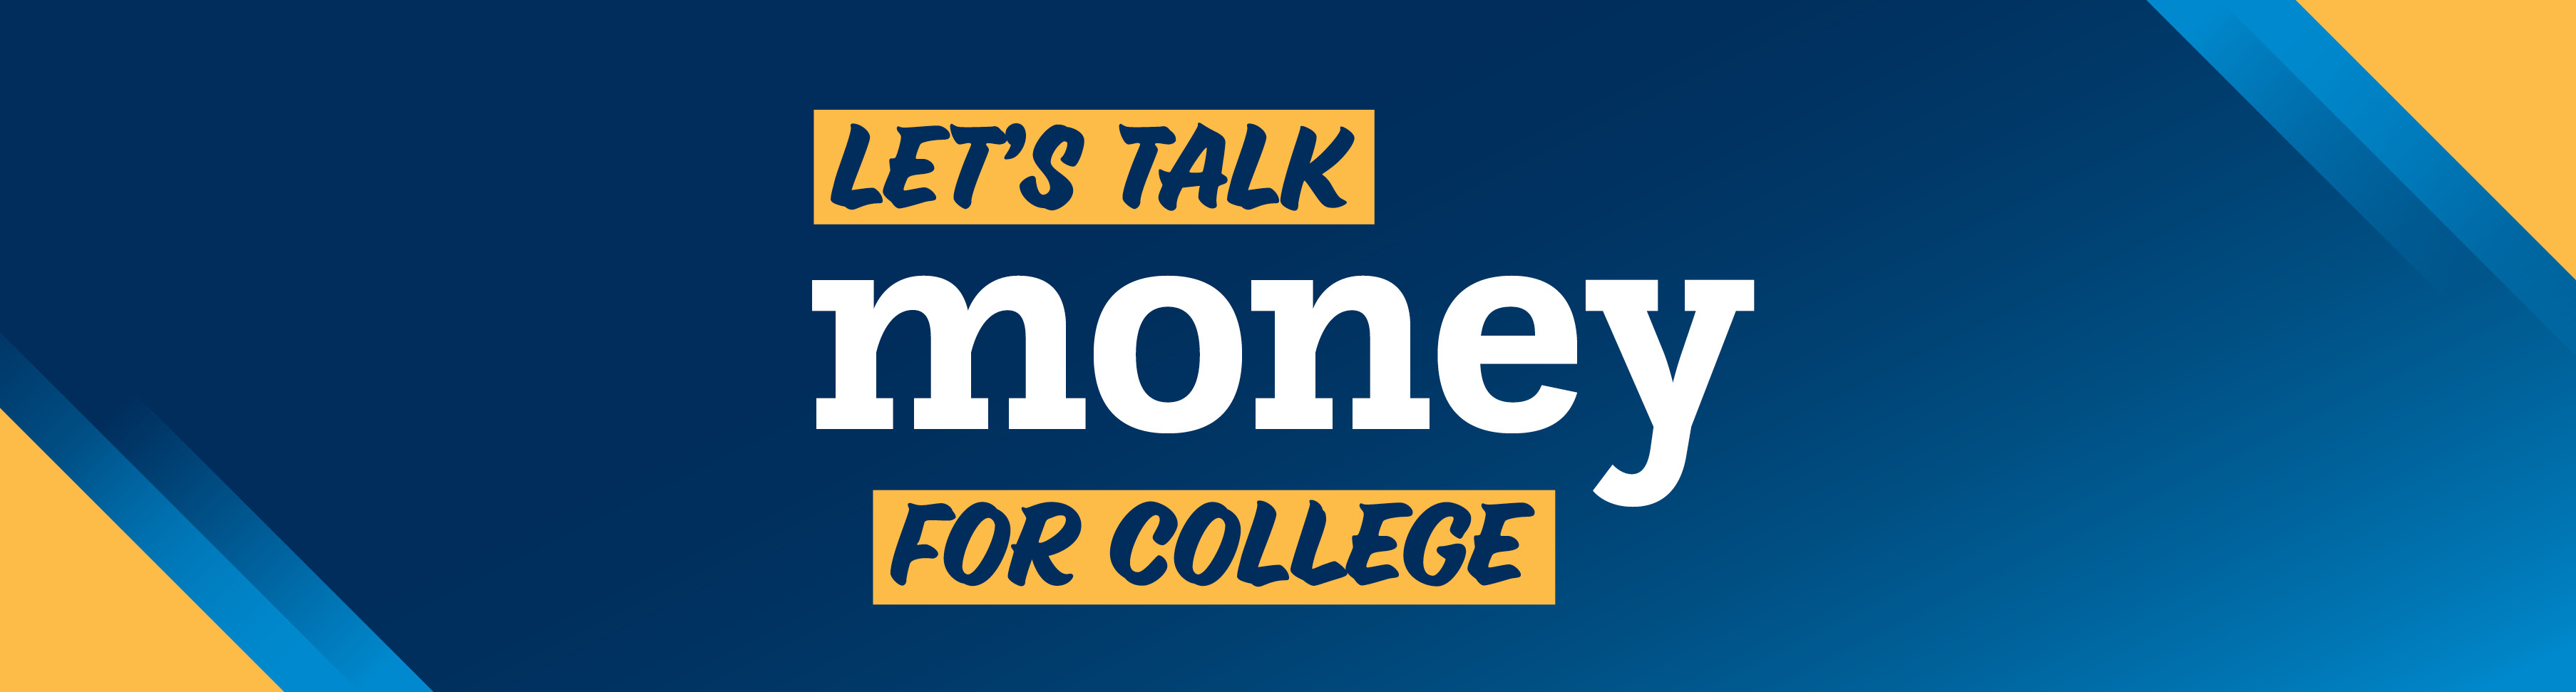 Let's talk money for college